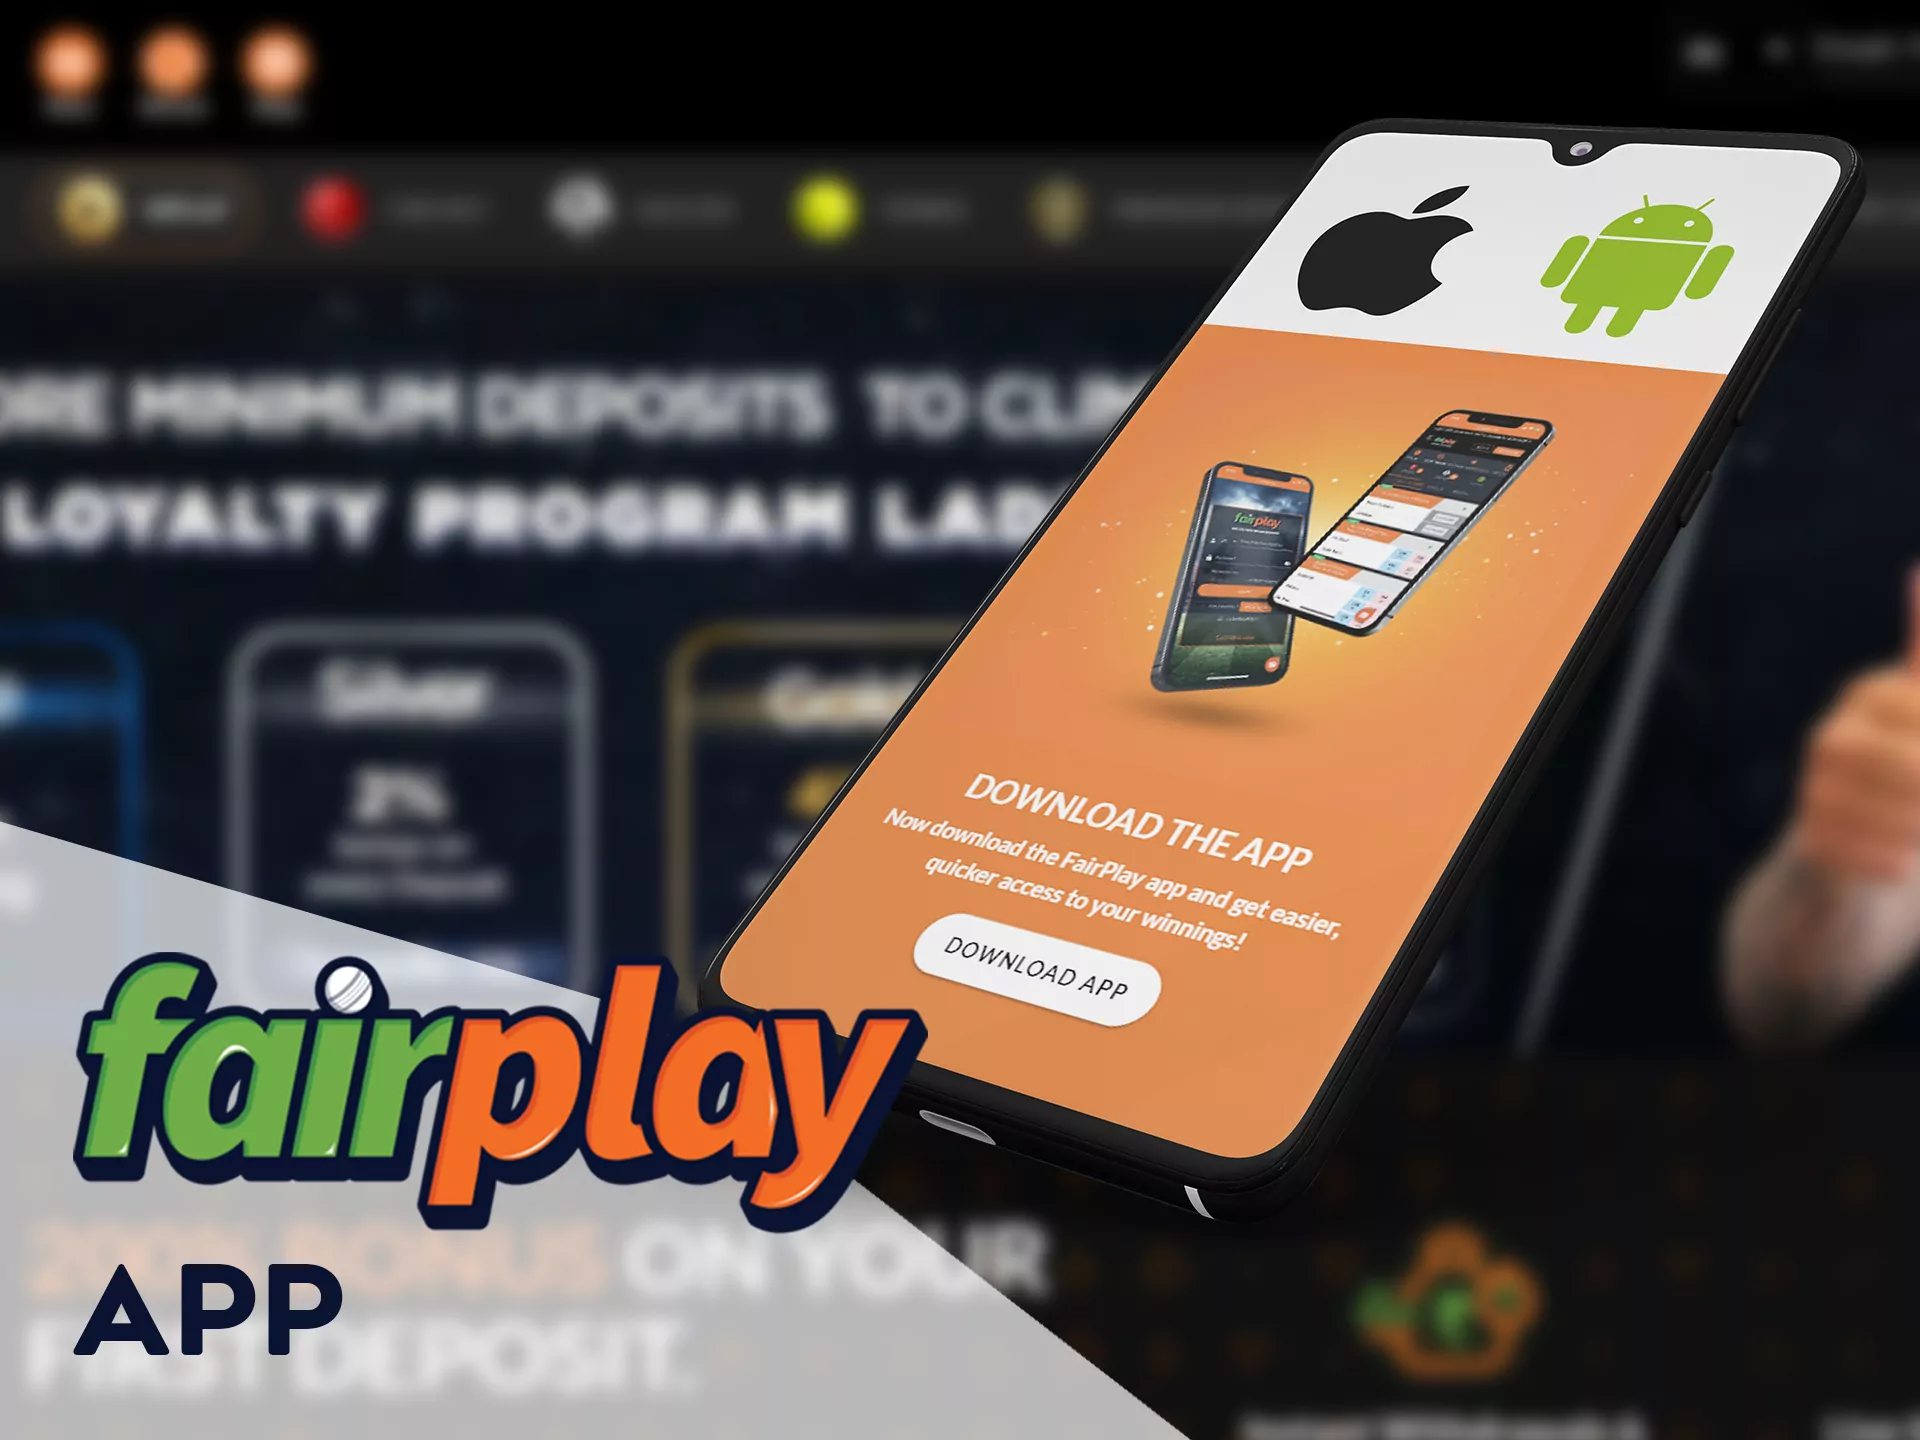 Download the Fairplay app to bet whenever you want.